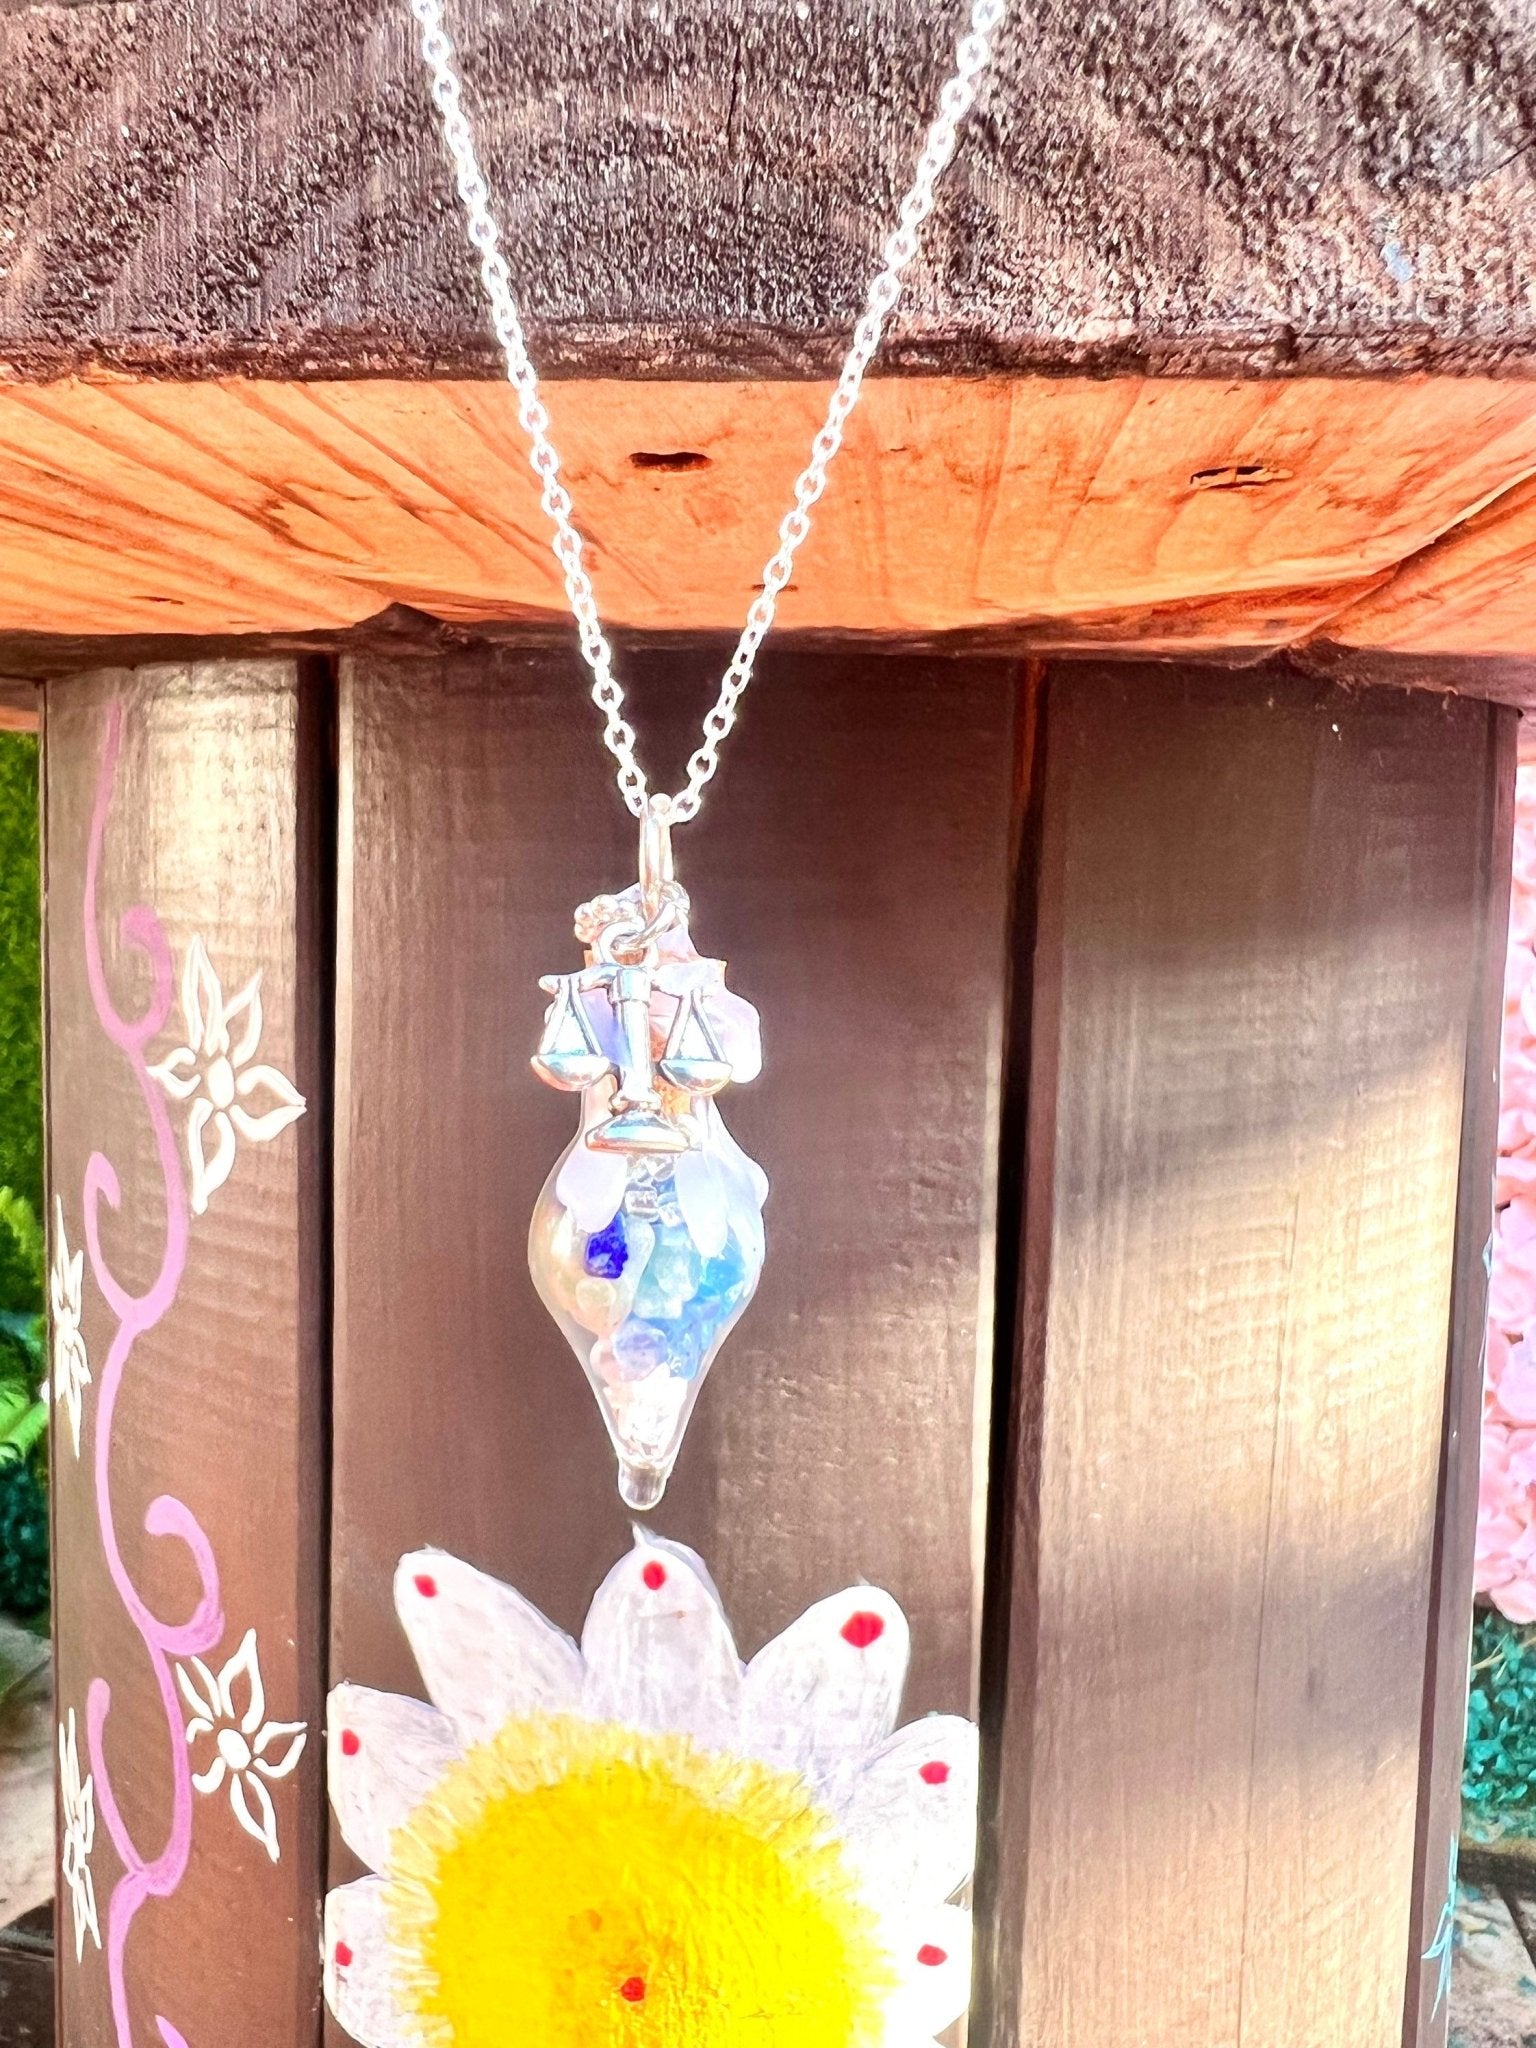 Zodiac Crystals Necklace Spell Jar Bottle - 12 Astrology Horoscope Signs Jewelry Charms Sterling Silver Chain - MysticBluuMoonTarot